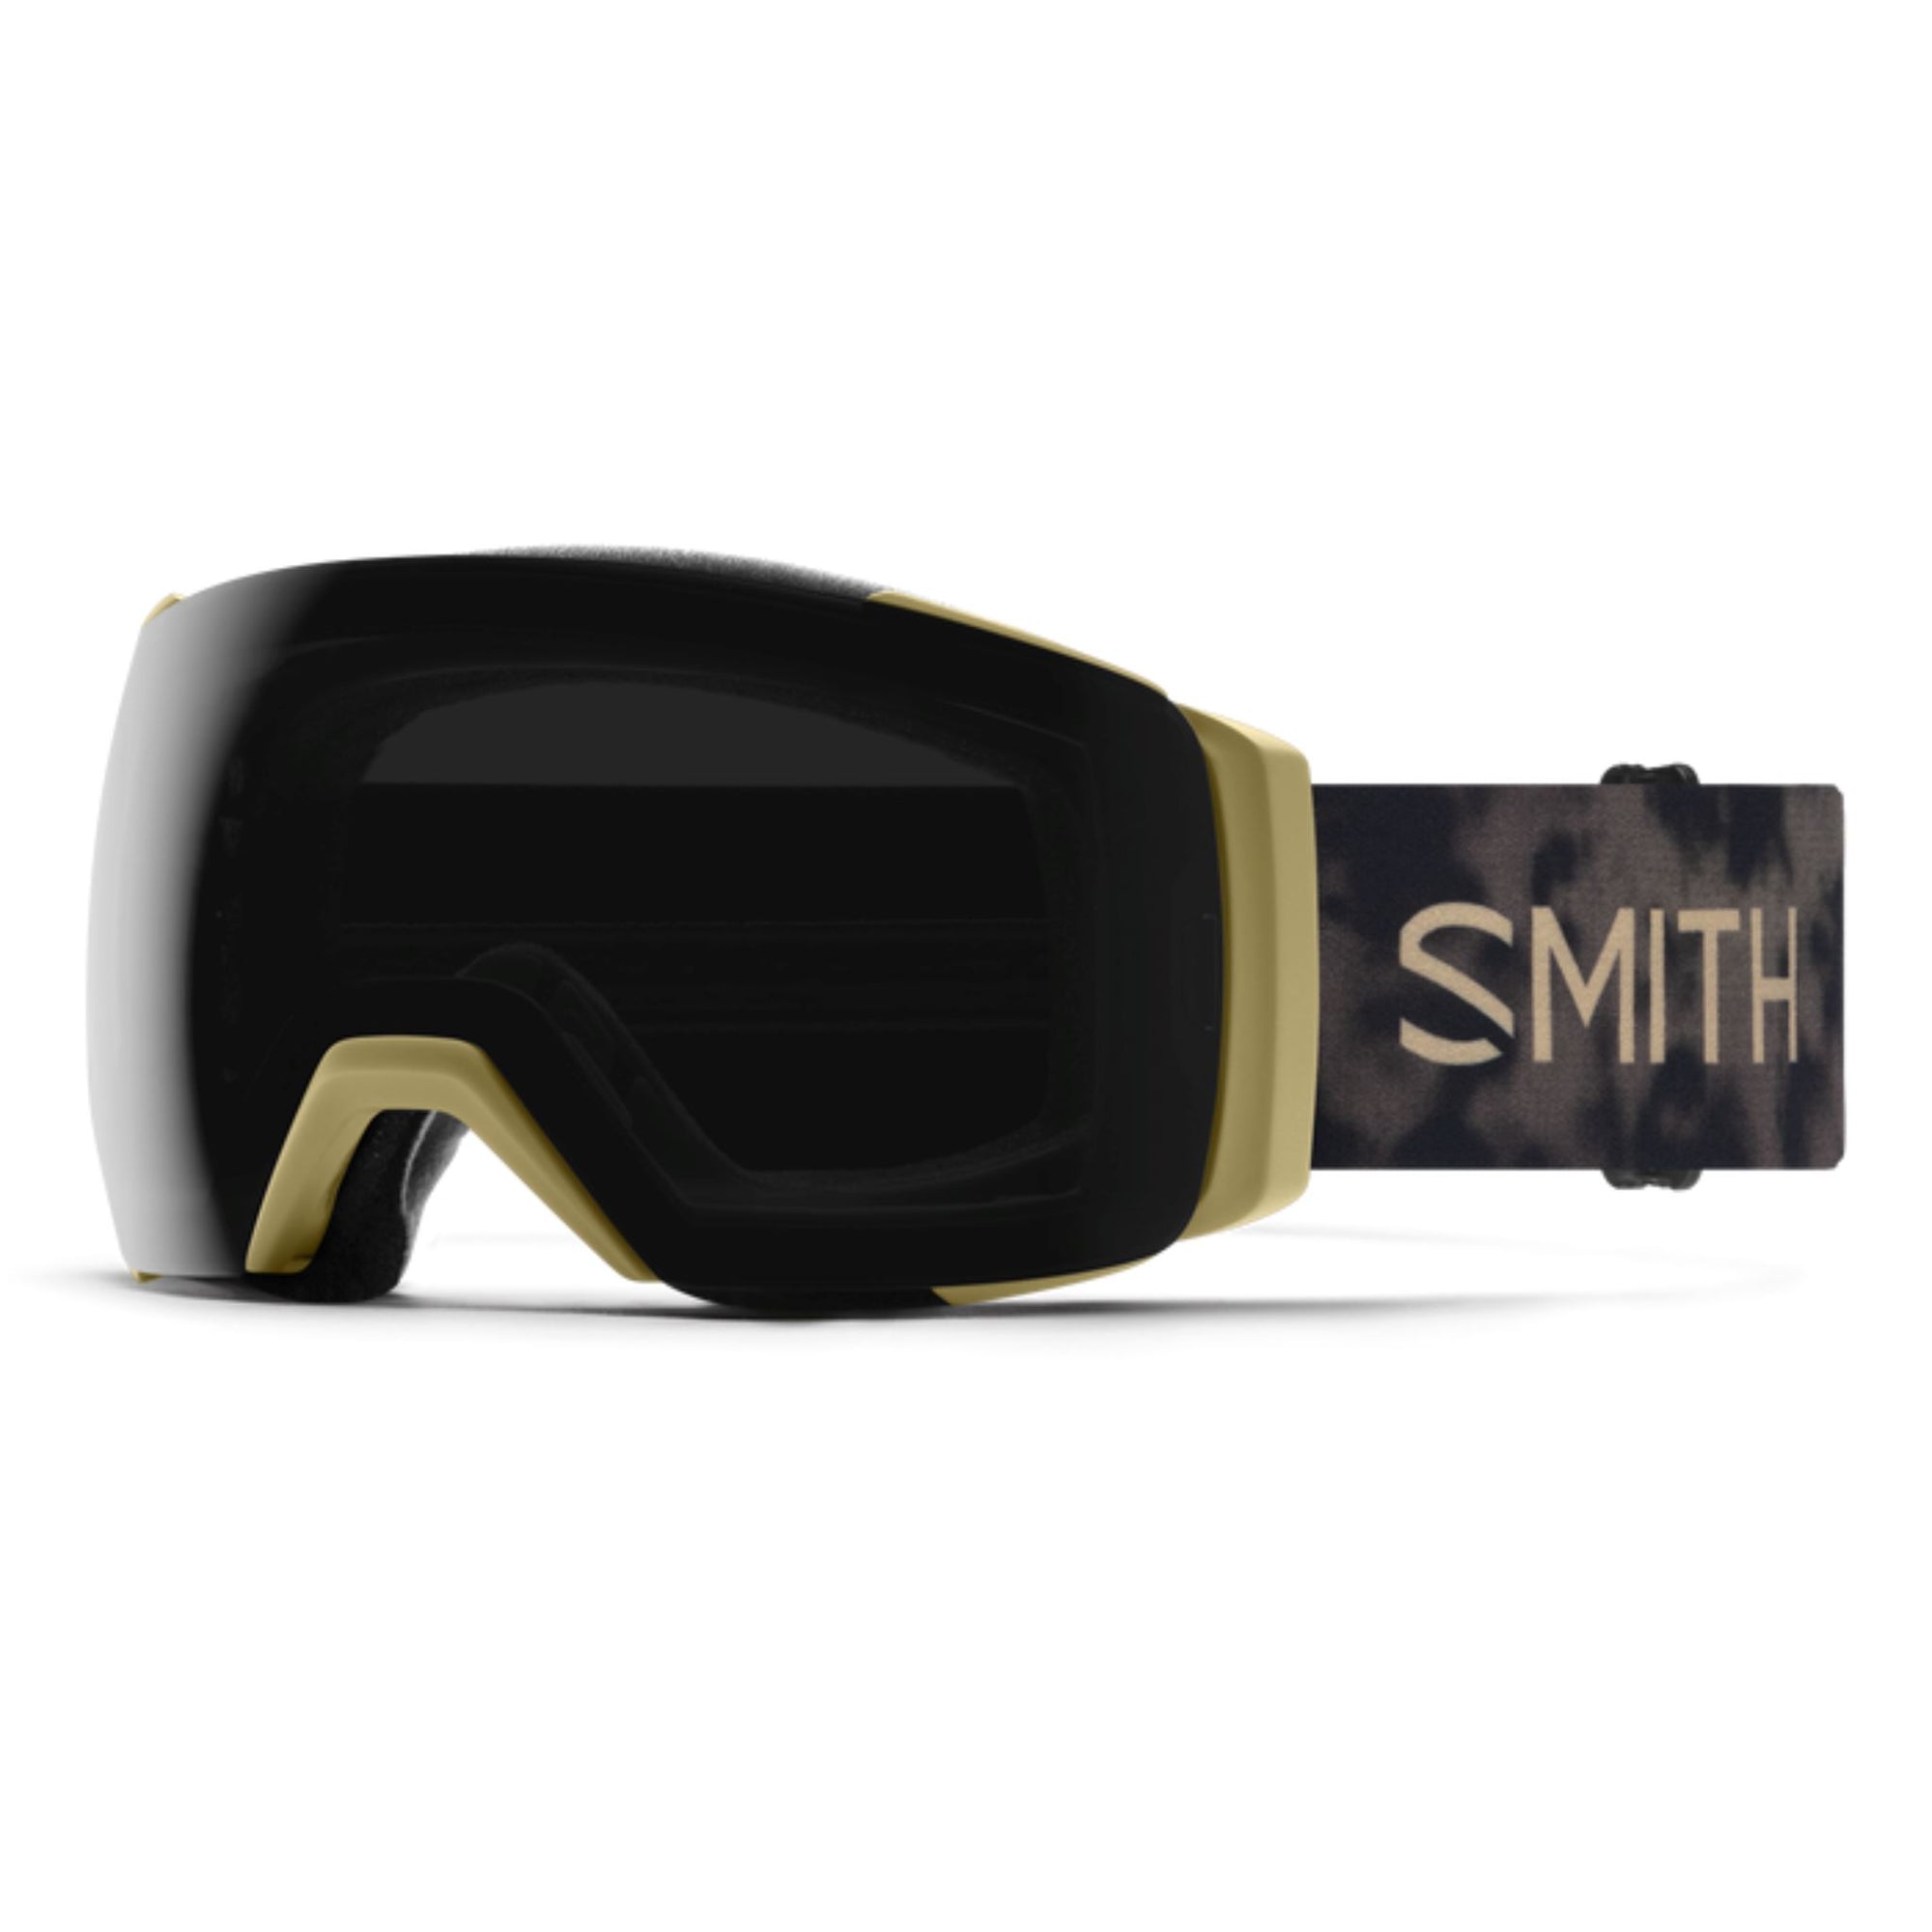 Smith I/O MAG XL Goggles (Large Fit) - Sandstorm Mind Expanders ChromaPop Sun Black Mirror Goggles Smith 